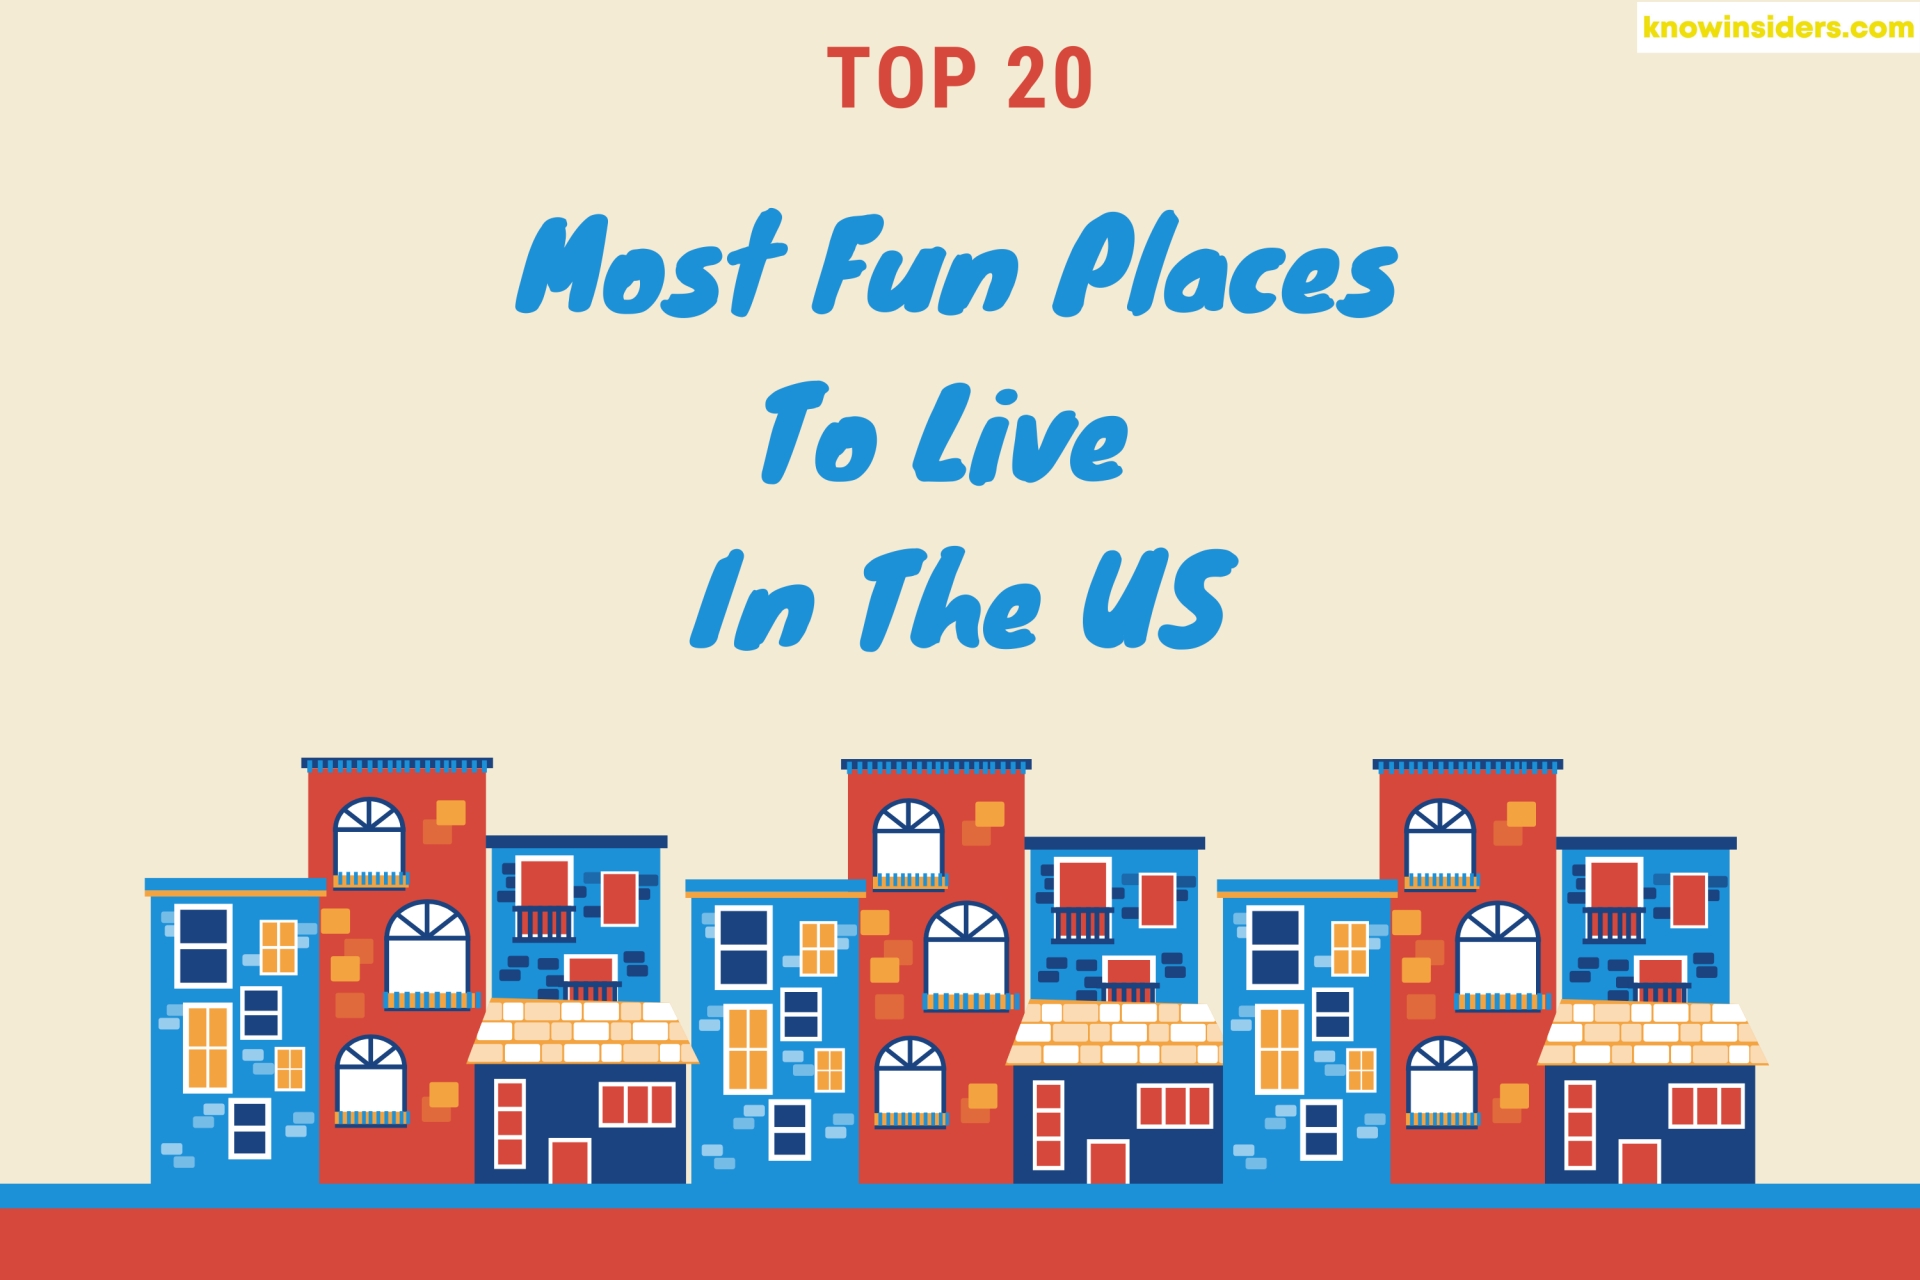 Top 20 Most Fun Places To Live In The US